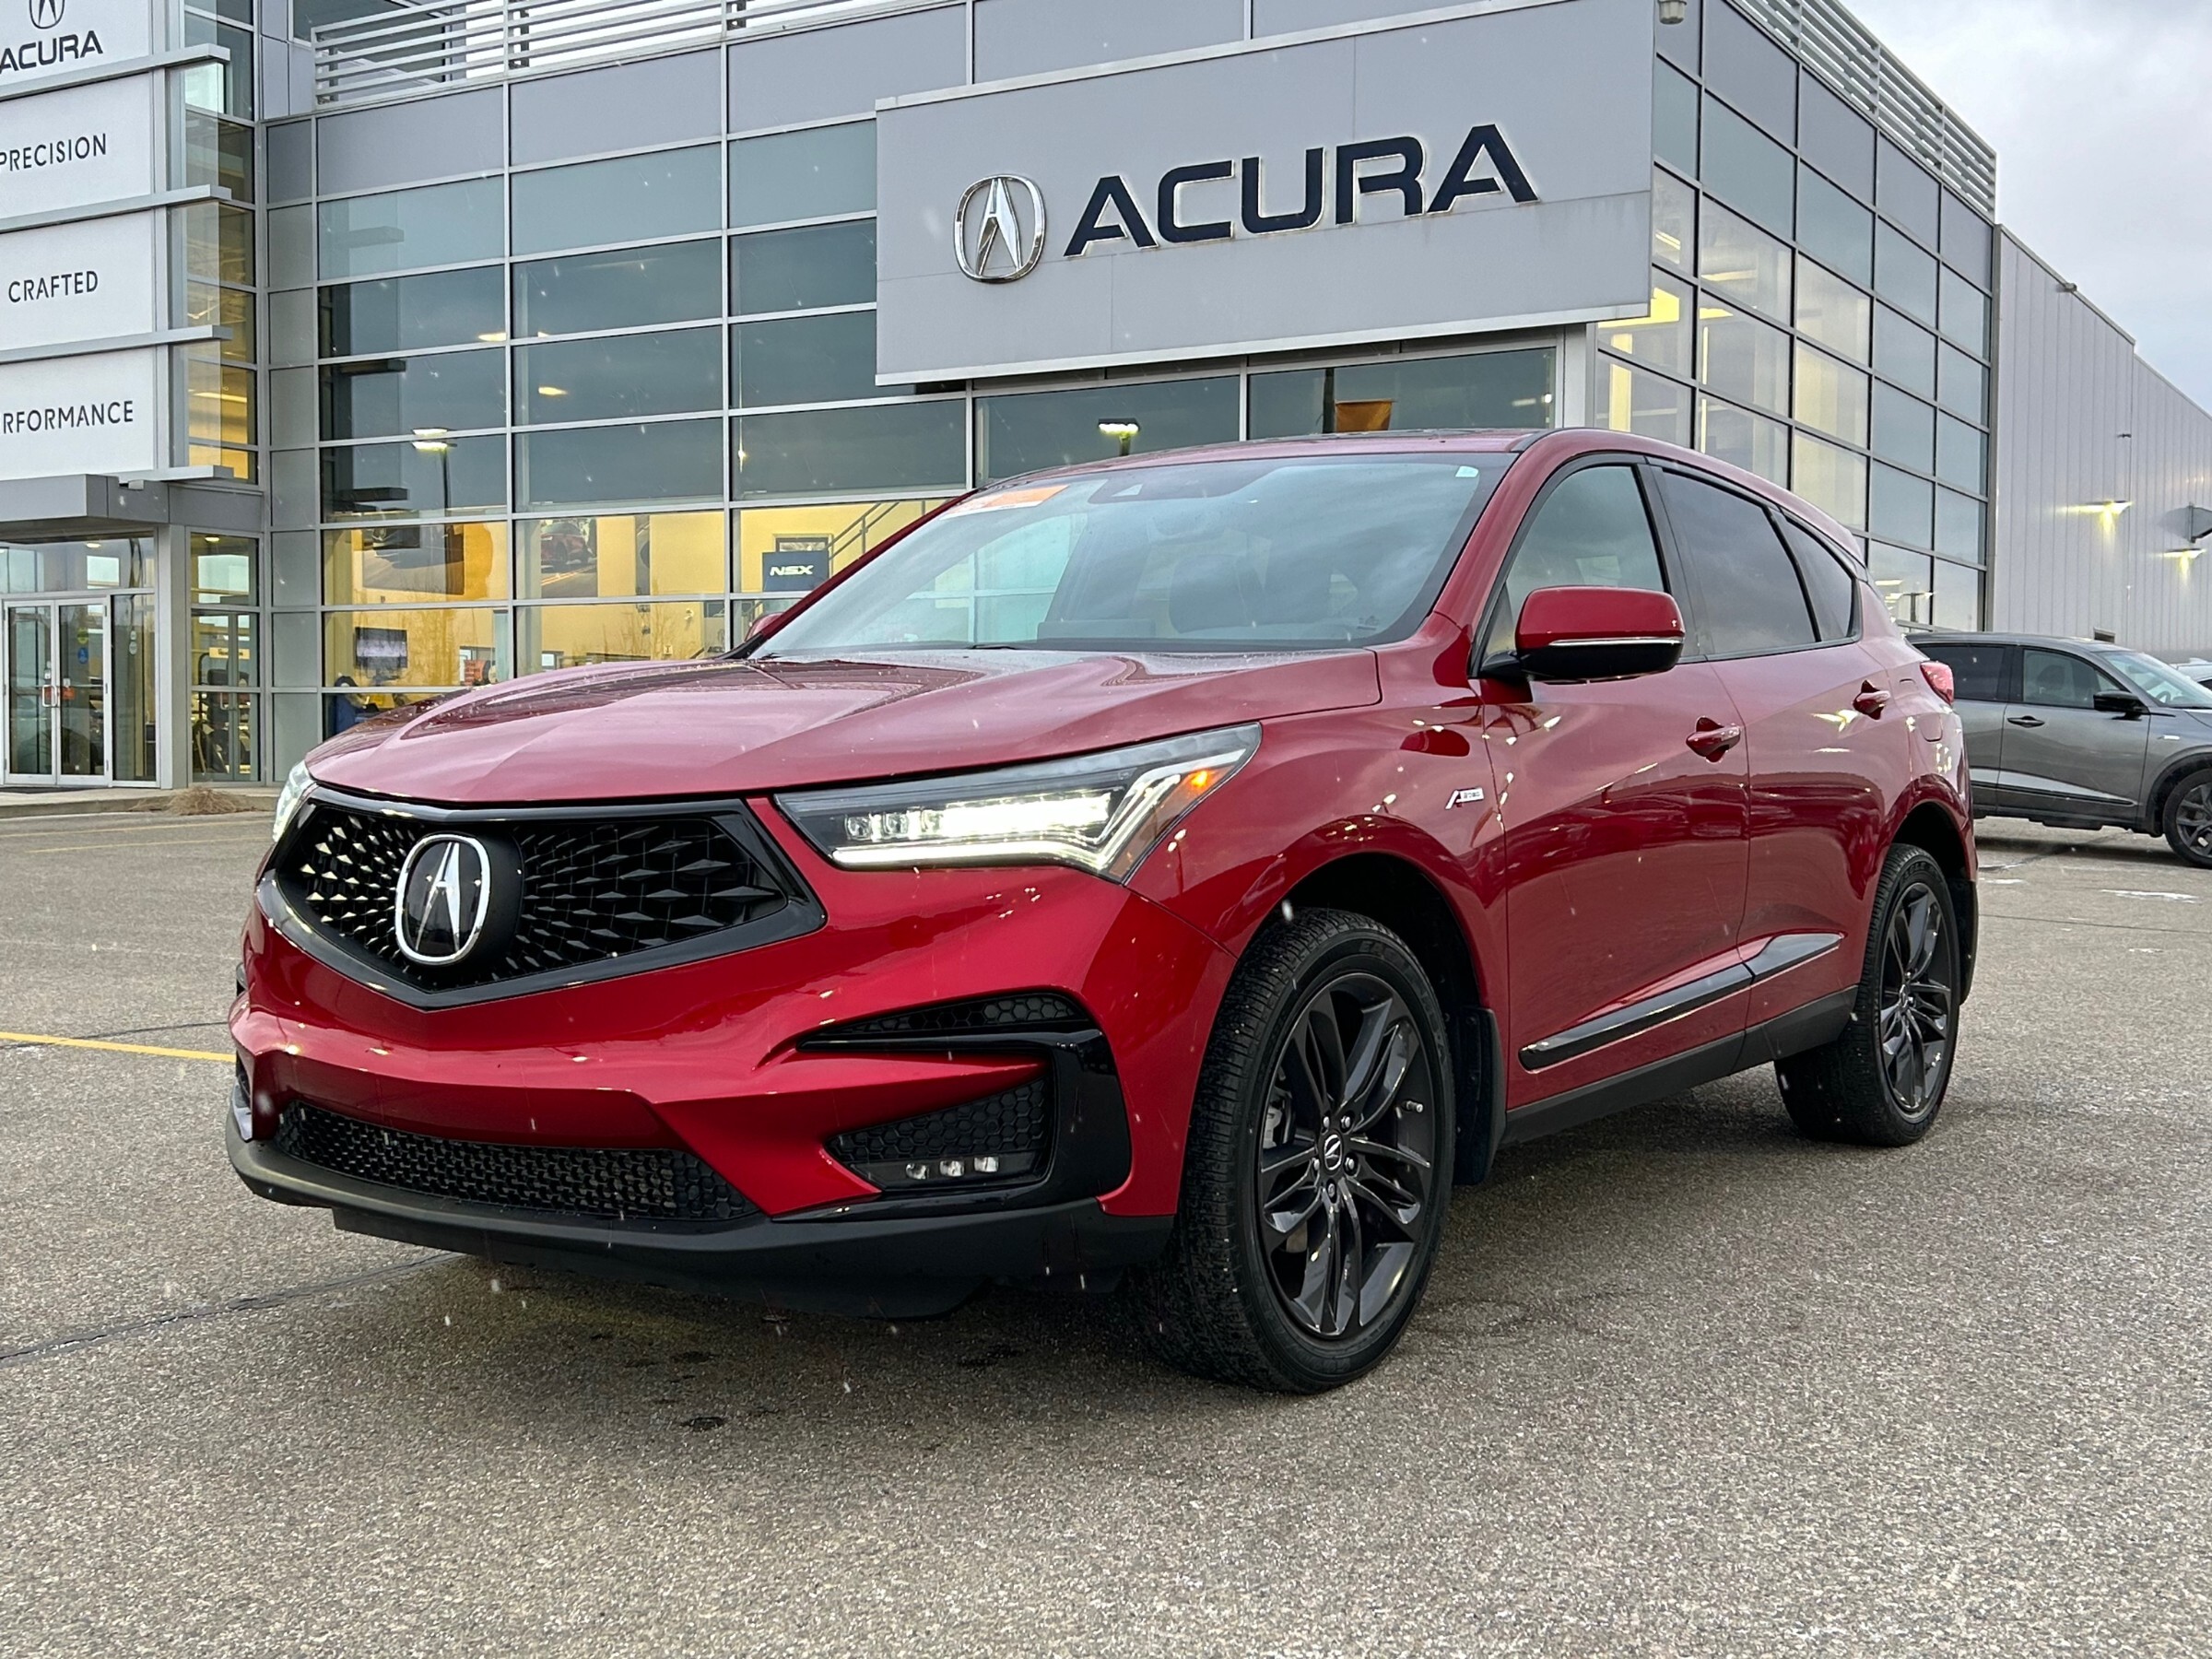 2020 Acura RDX A-Spec FRESH ON THE LOT SPECIAL!!!